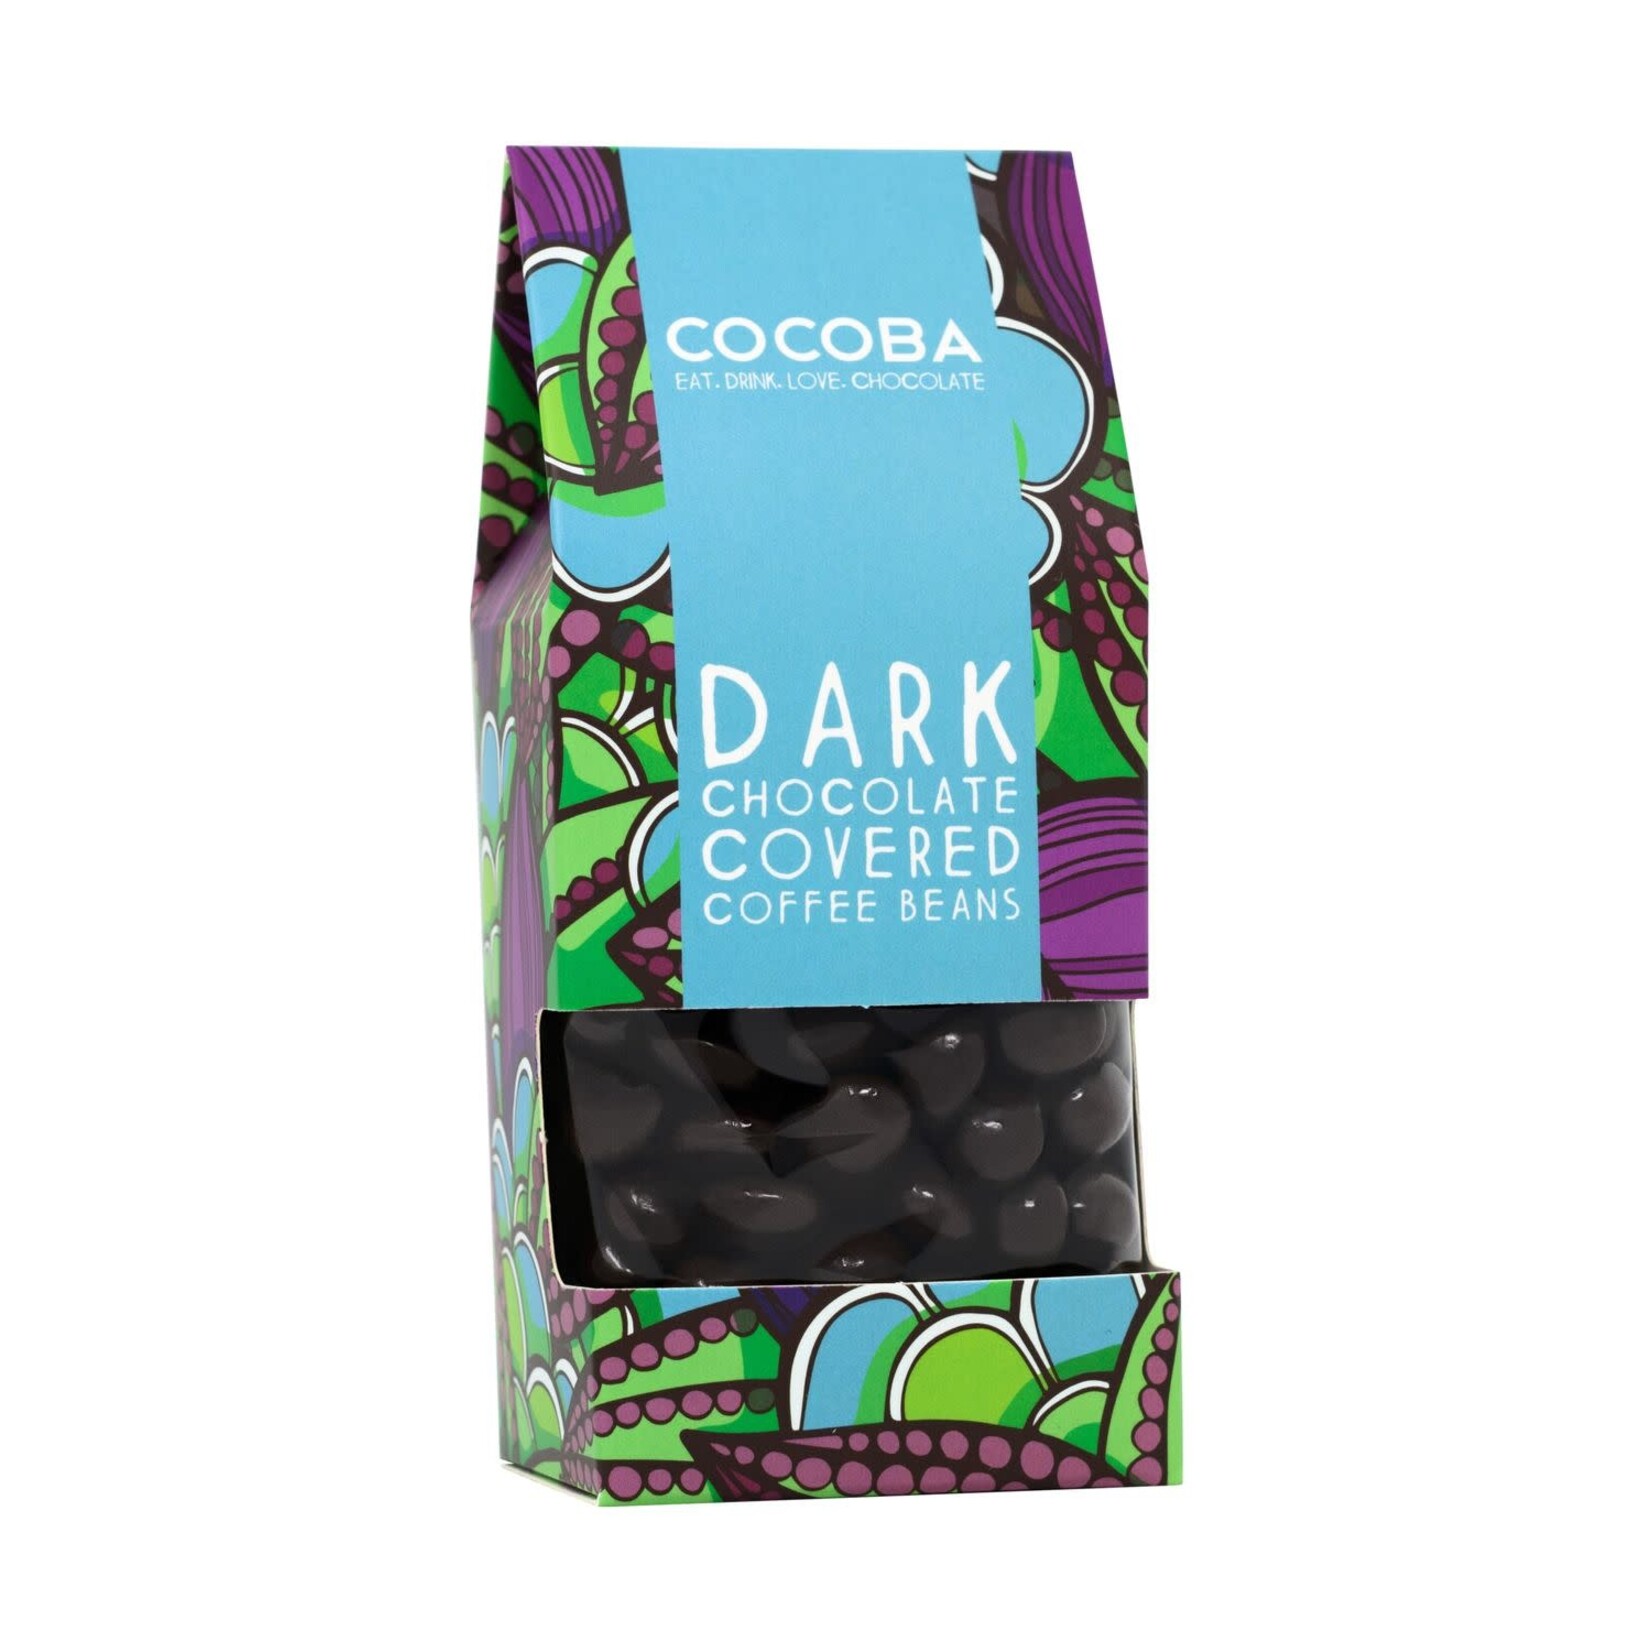 Cocoba Dark Chocolate Covered Coffee Beans